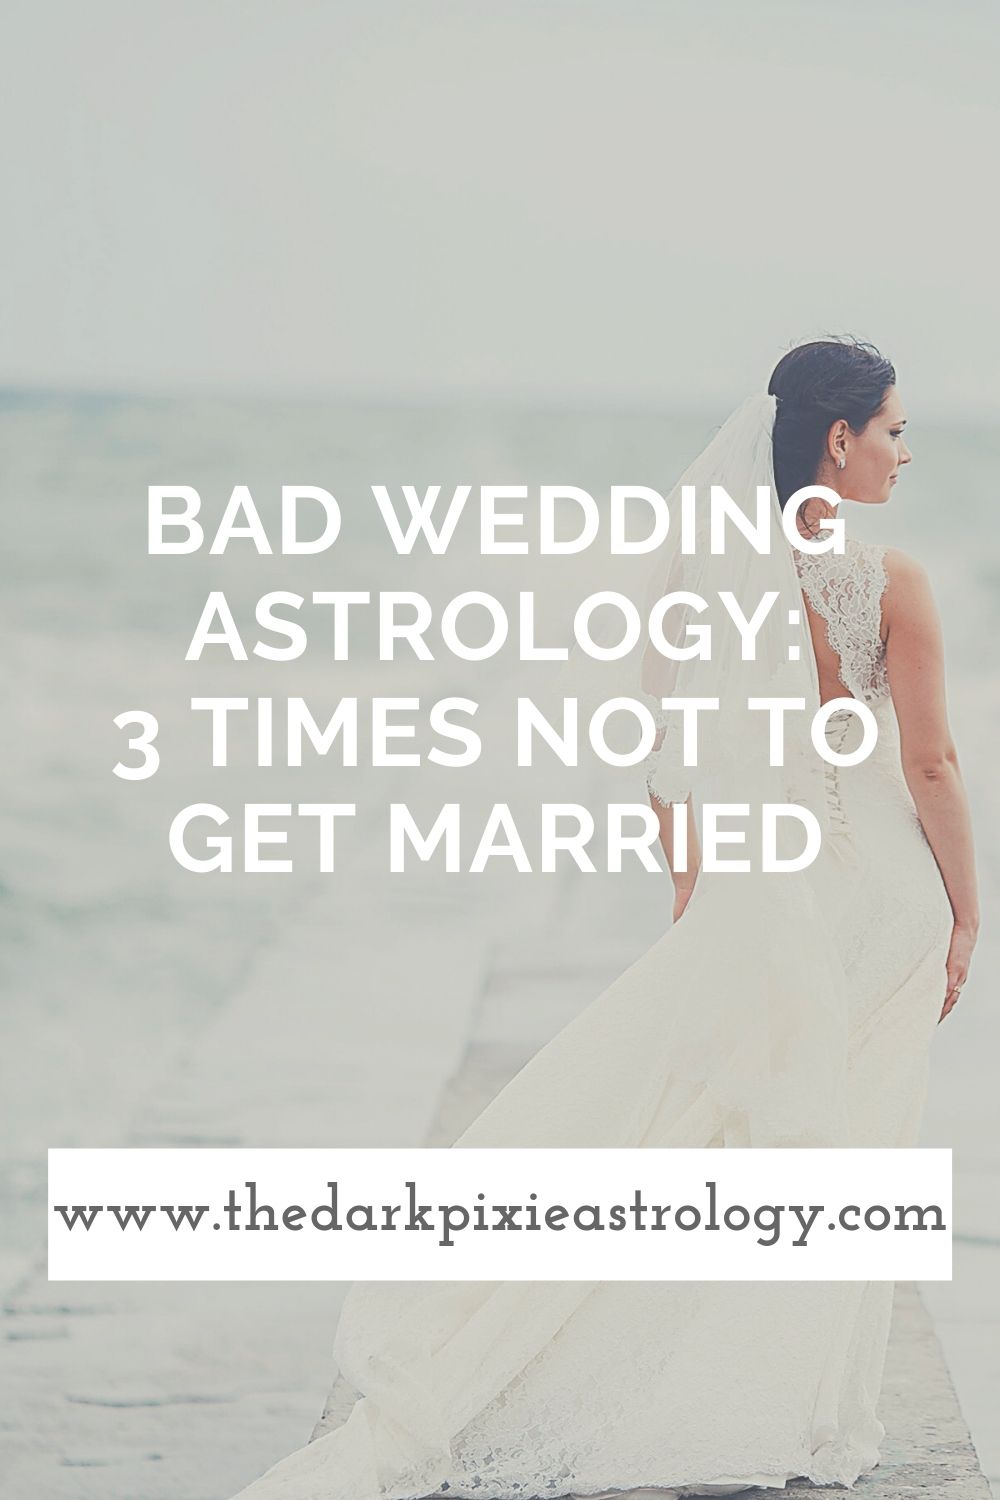 Bad Wedding Astrology: 3 Times NOT to Get Married - The Dark Pixie Astrology